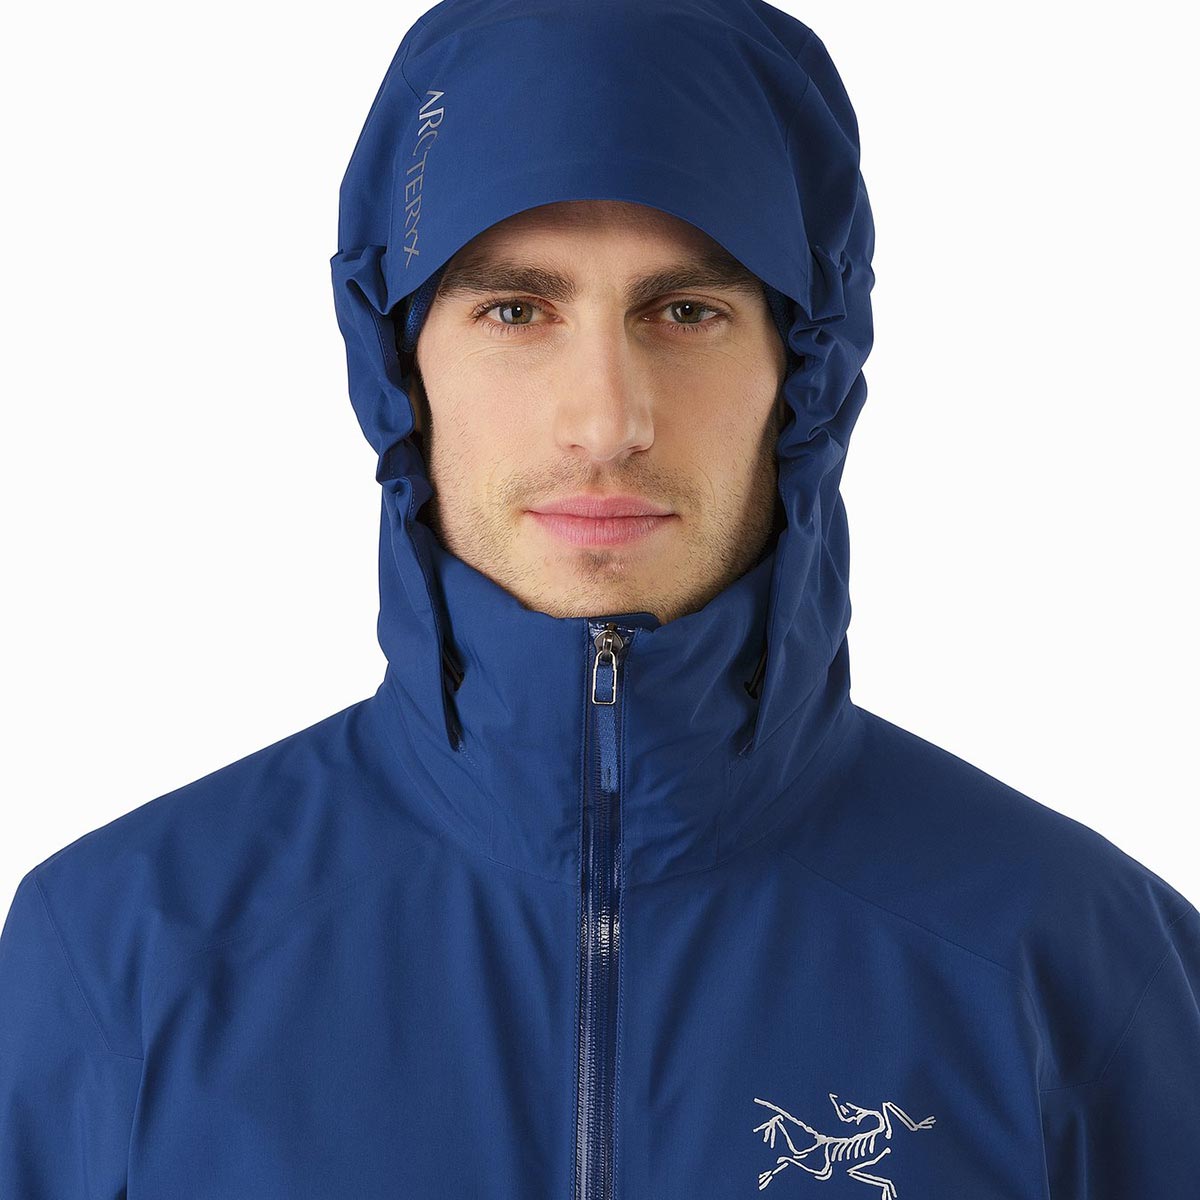 Arc'teryx Iser Jacket, men's, discontinued model (free ground shipping ...